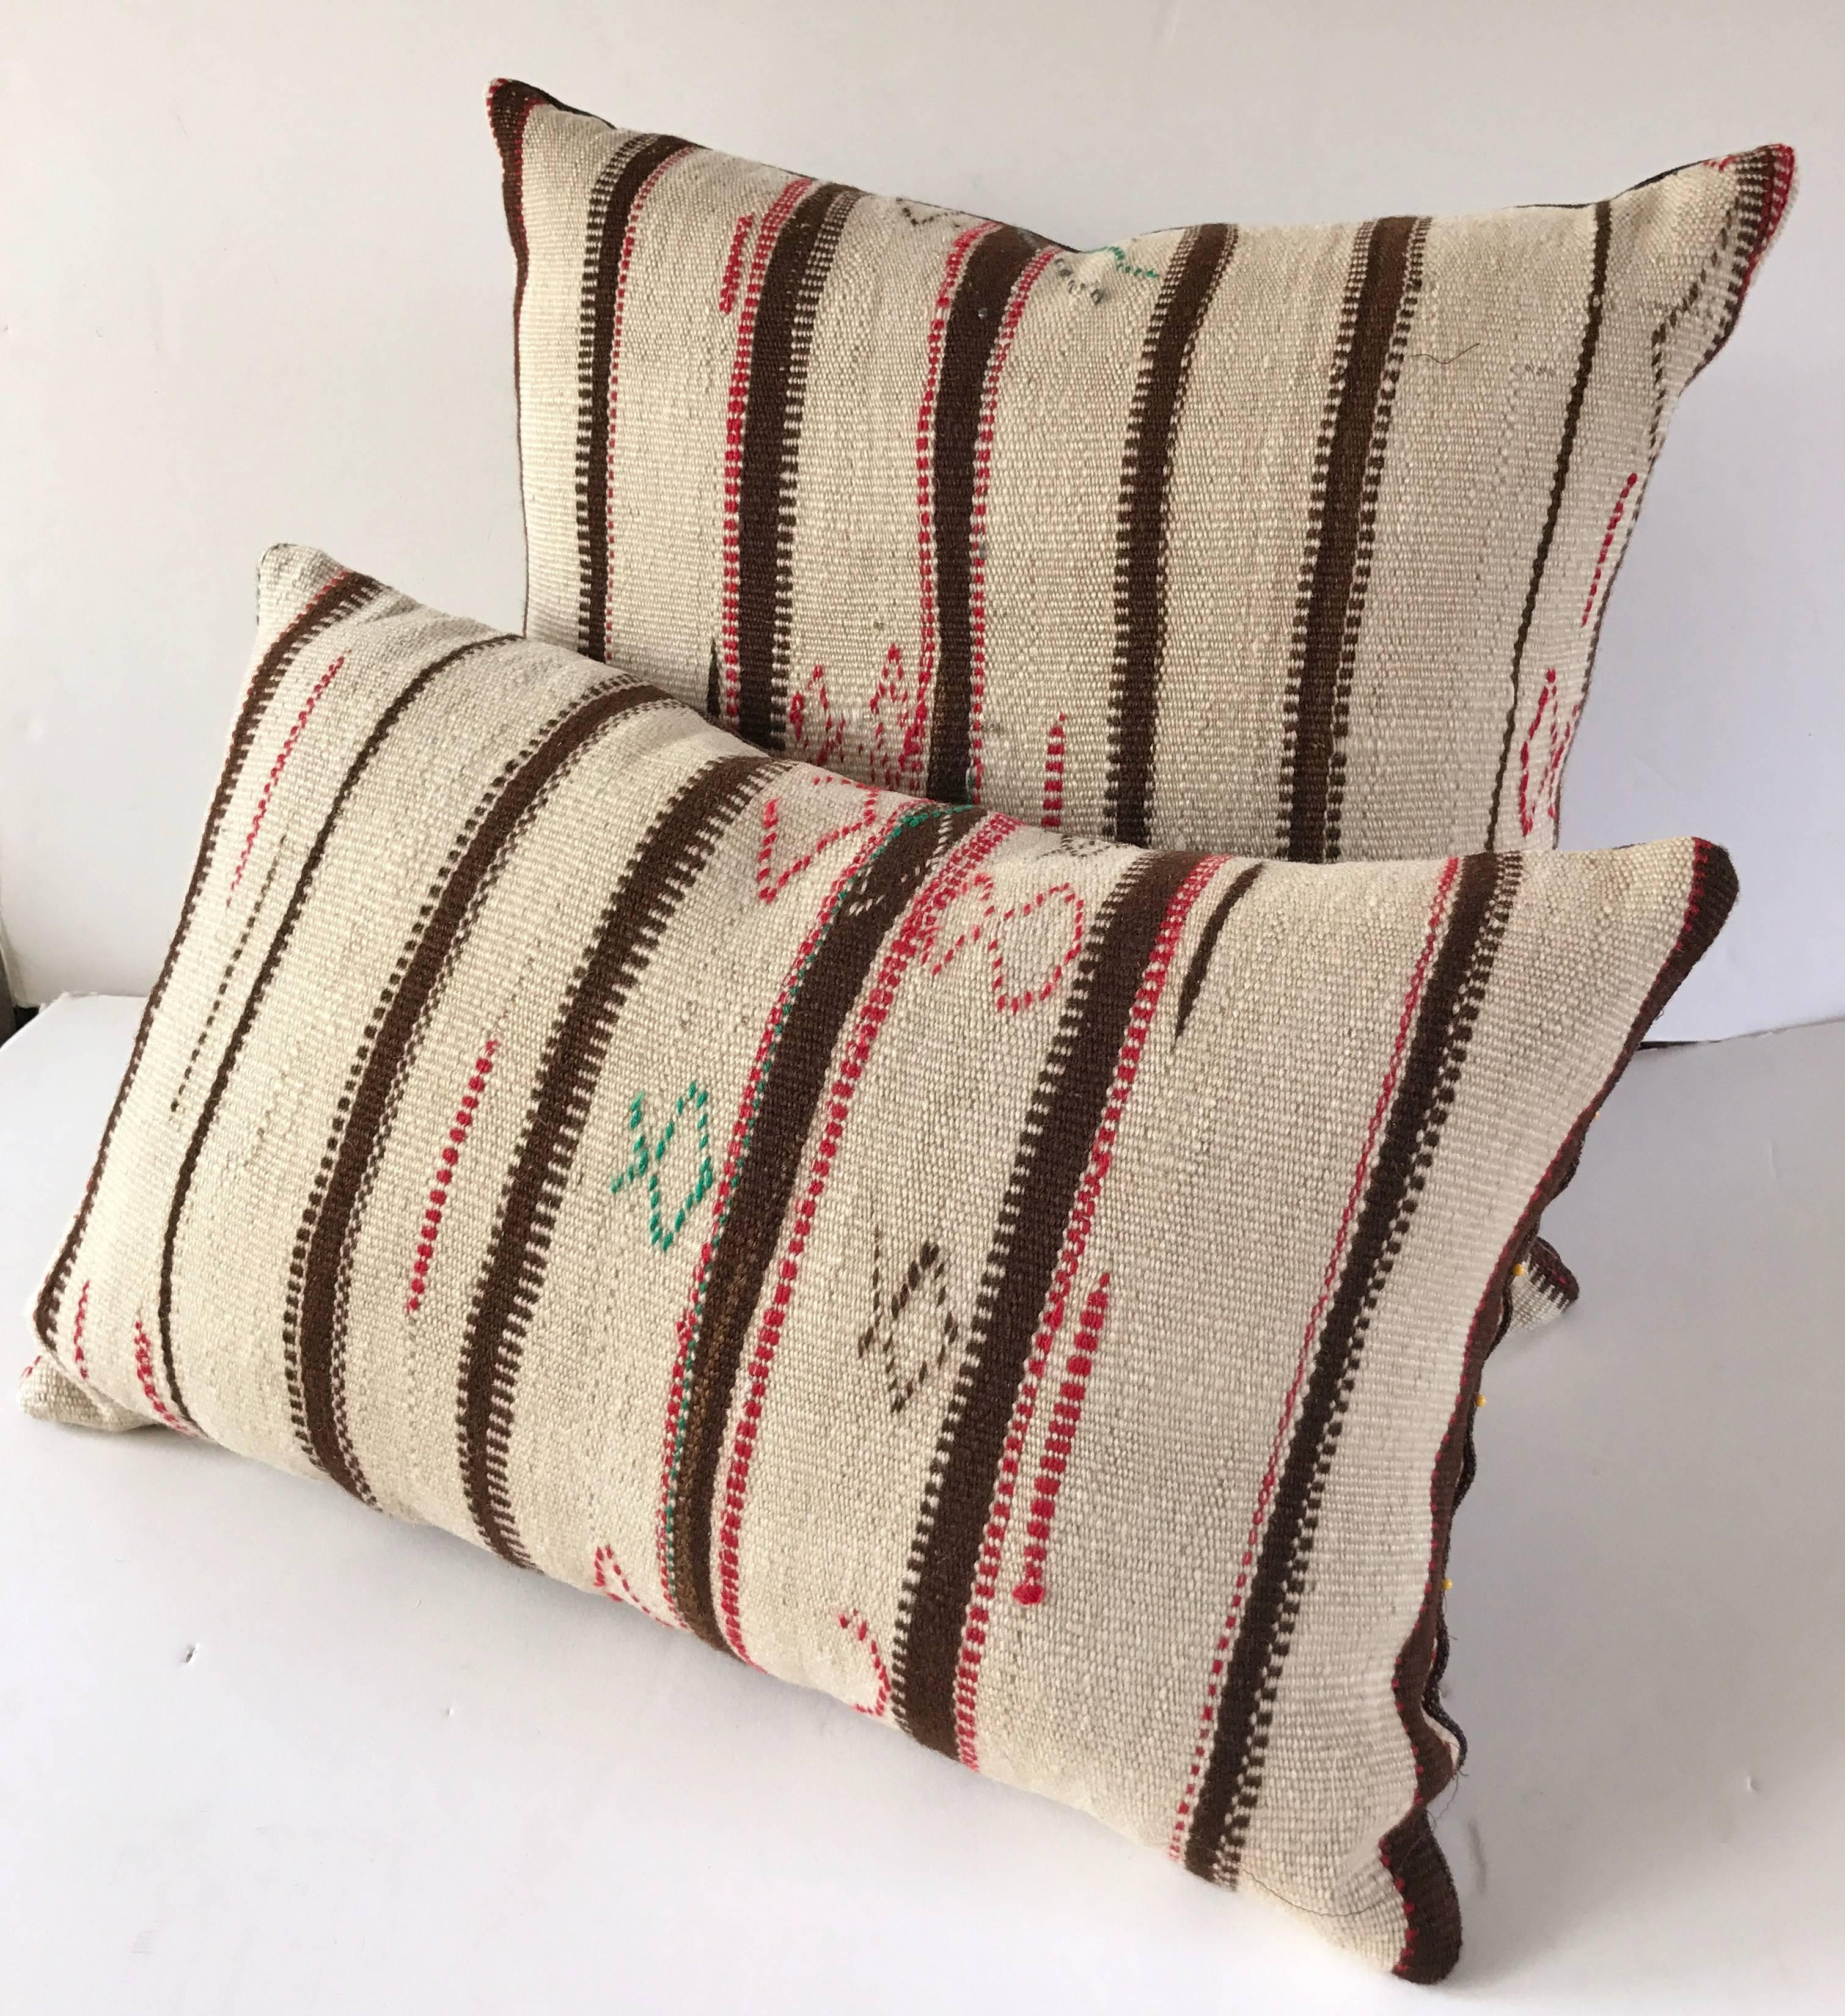 Custom pillow cut from a hand-loomed wool Moroccan Berber rug from the Atlas Mountains. Flat-weave stripes are embellished with tribal embroidered designs. Pillow is backed in a brown linen blend, filled with an insert of 100% down and hand-sewn